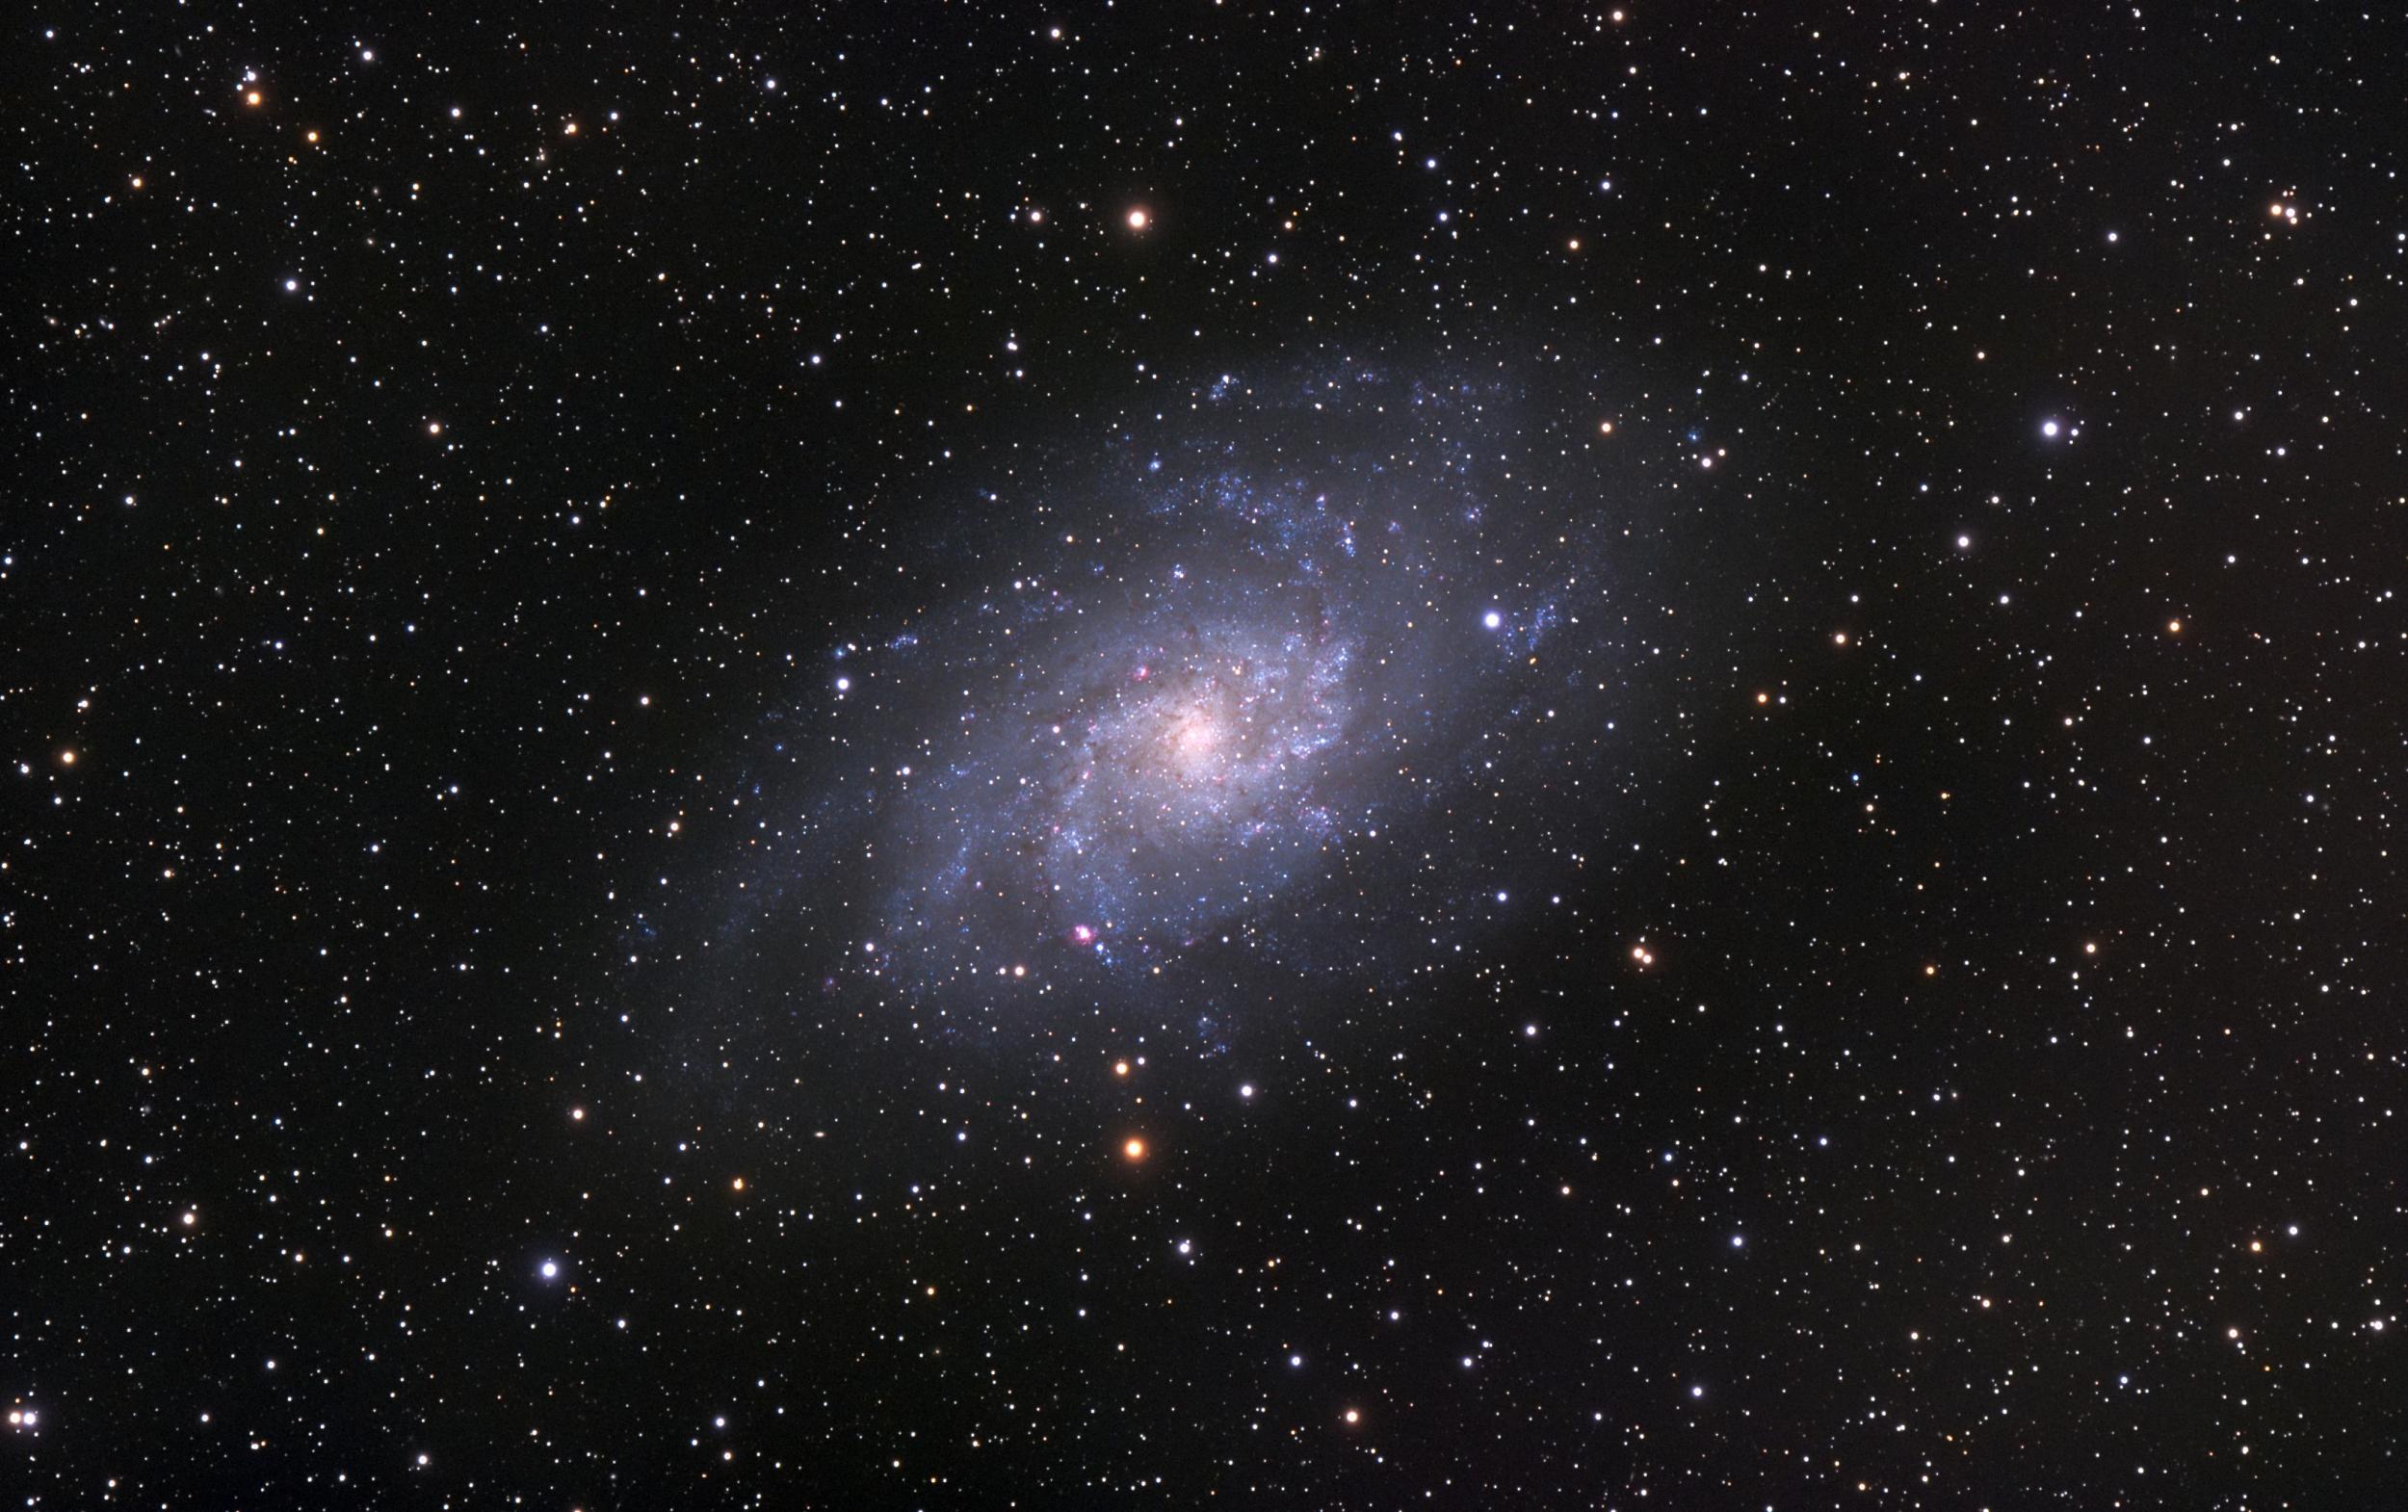 It is possible to see the Triangulum Galaxy with the naked eye from here